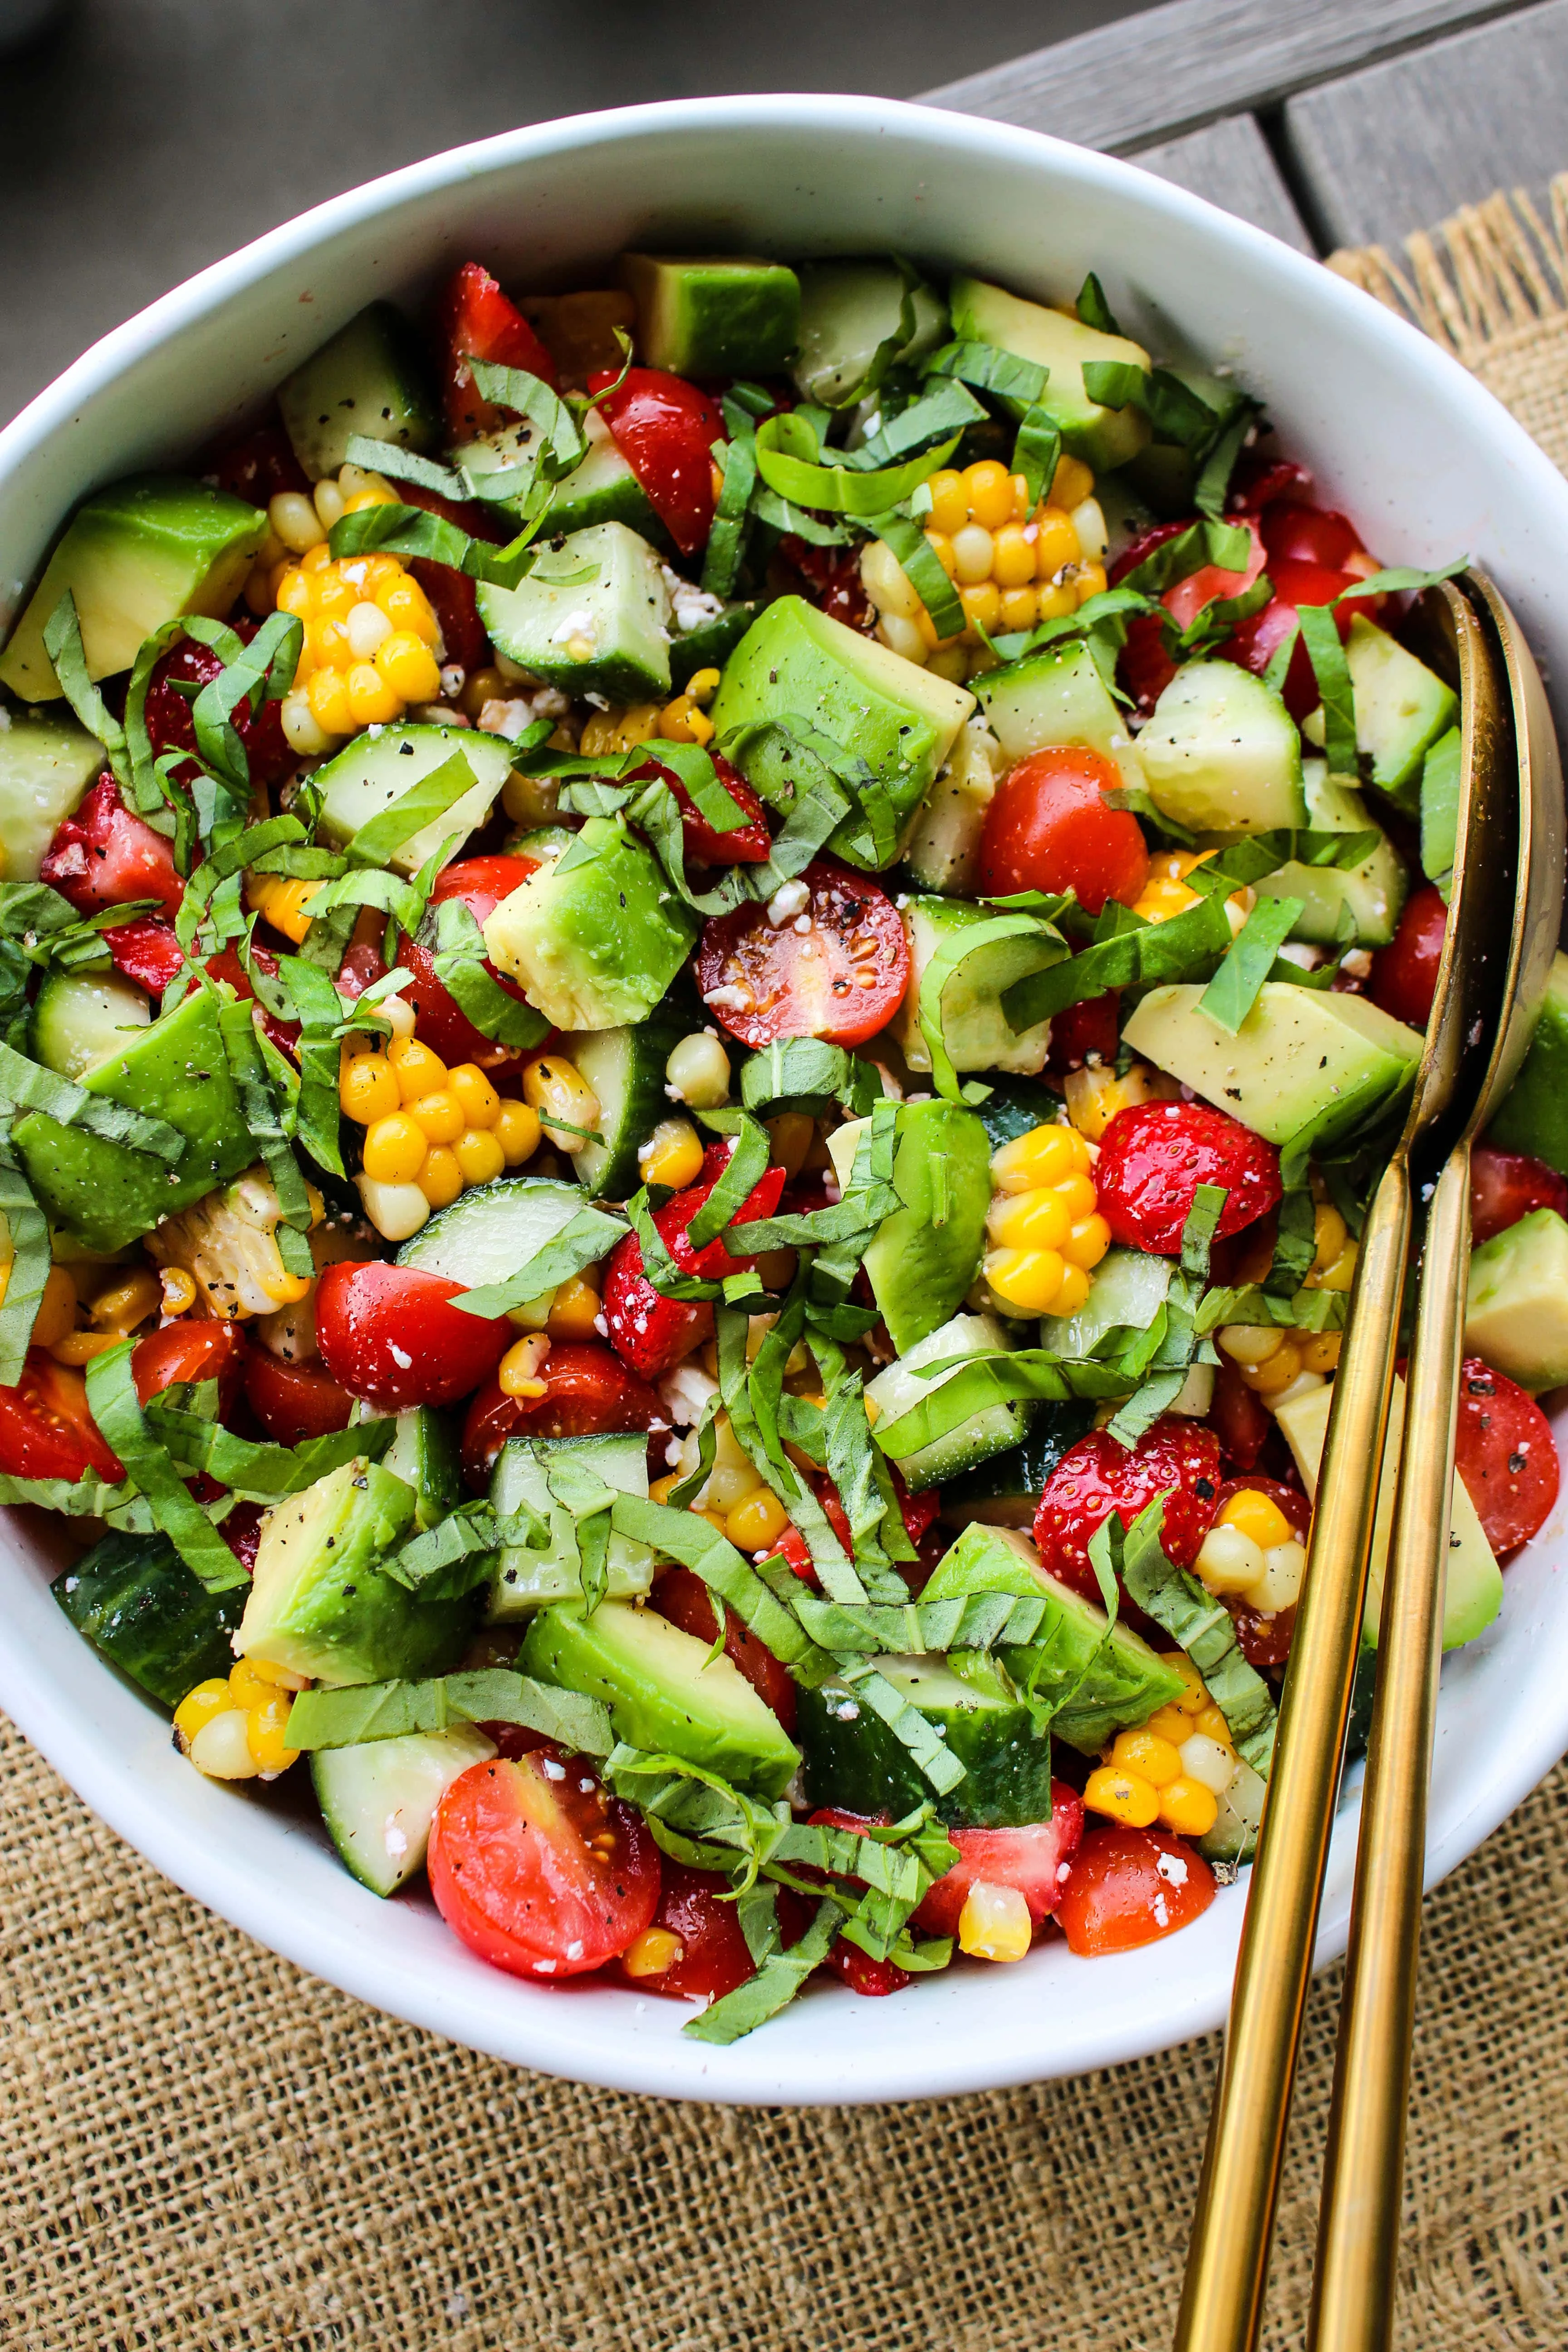 The Hydrating Benefit Of Your Lunchtime Salad